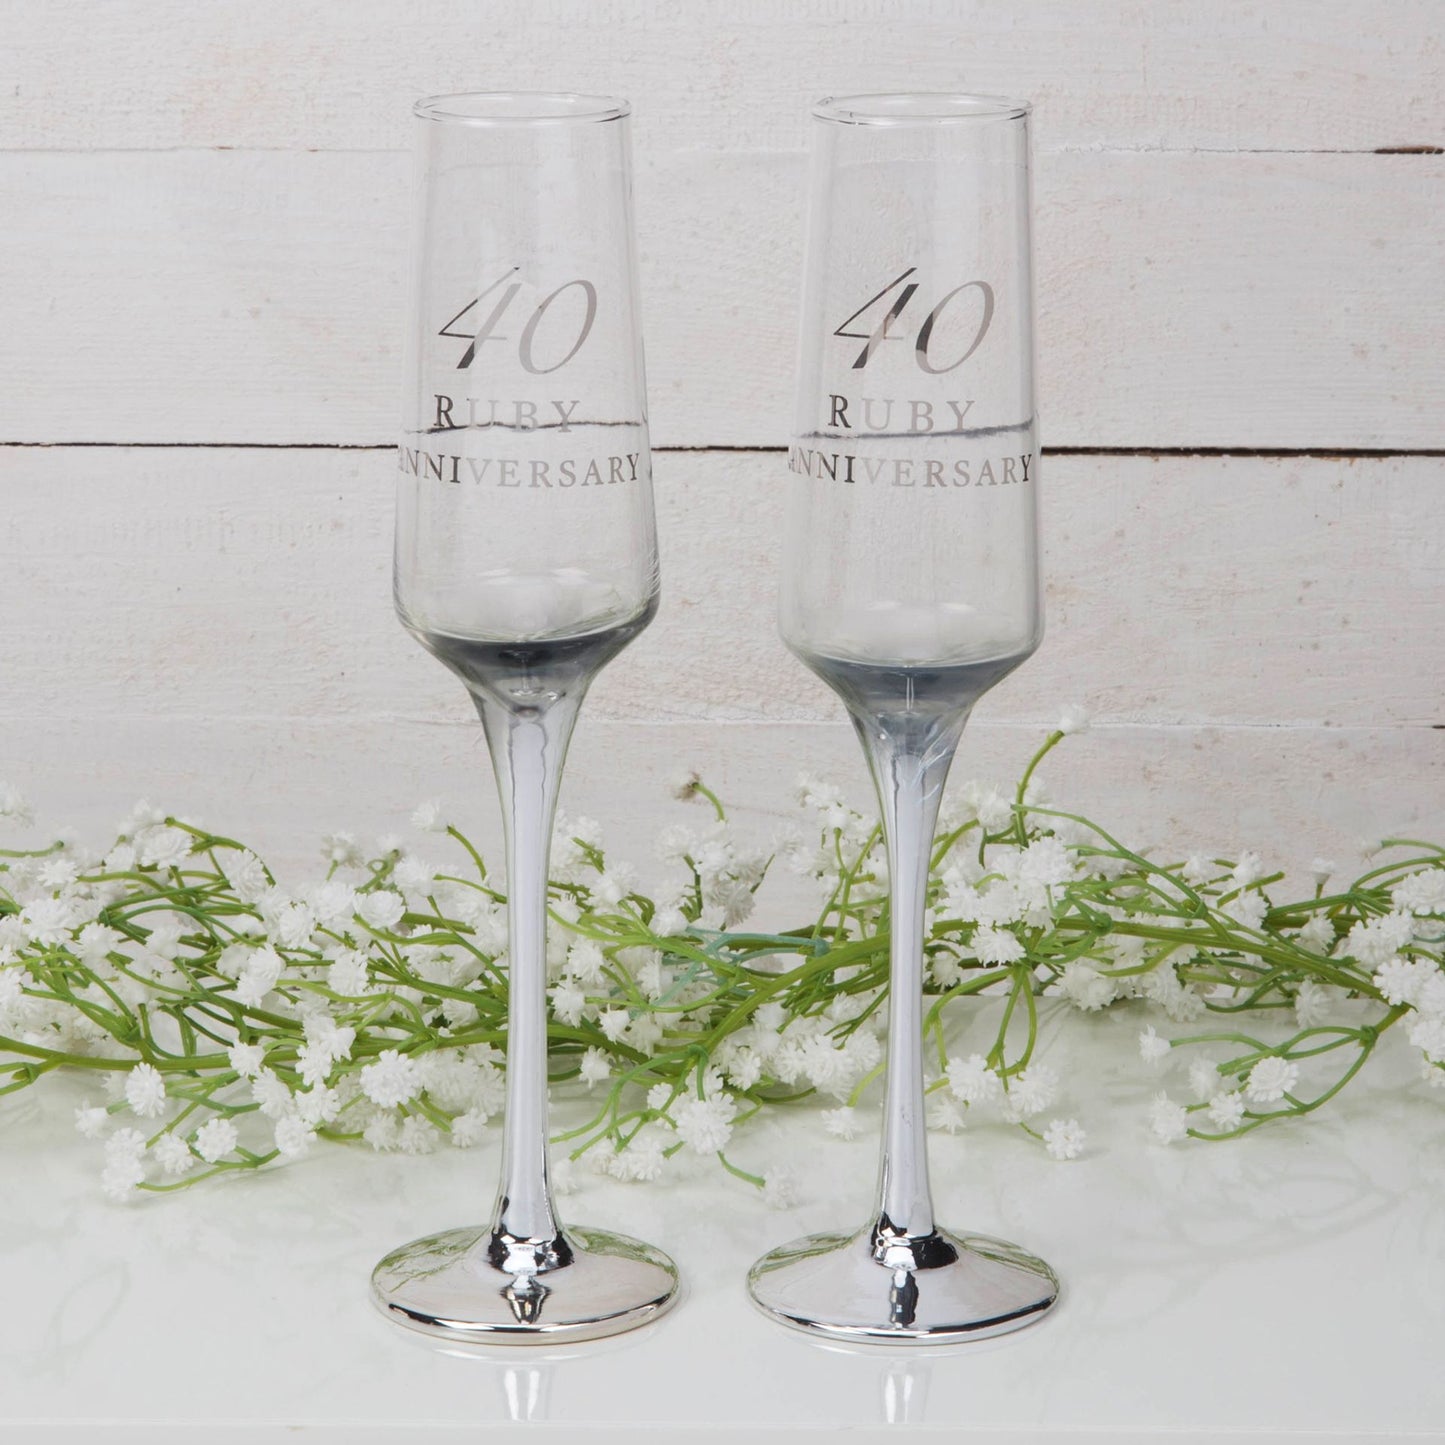 Amore Champagne Flutes Set of 2 - 40th Anniversary